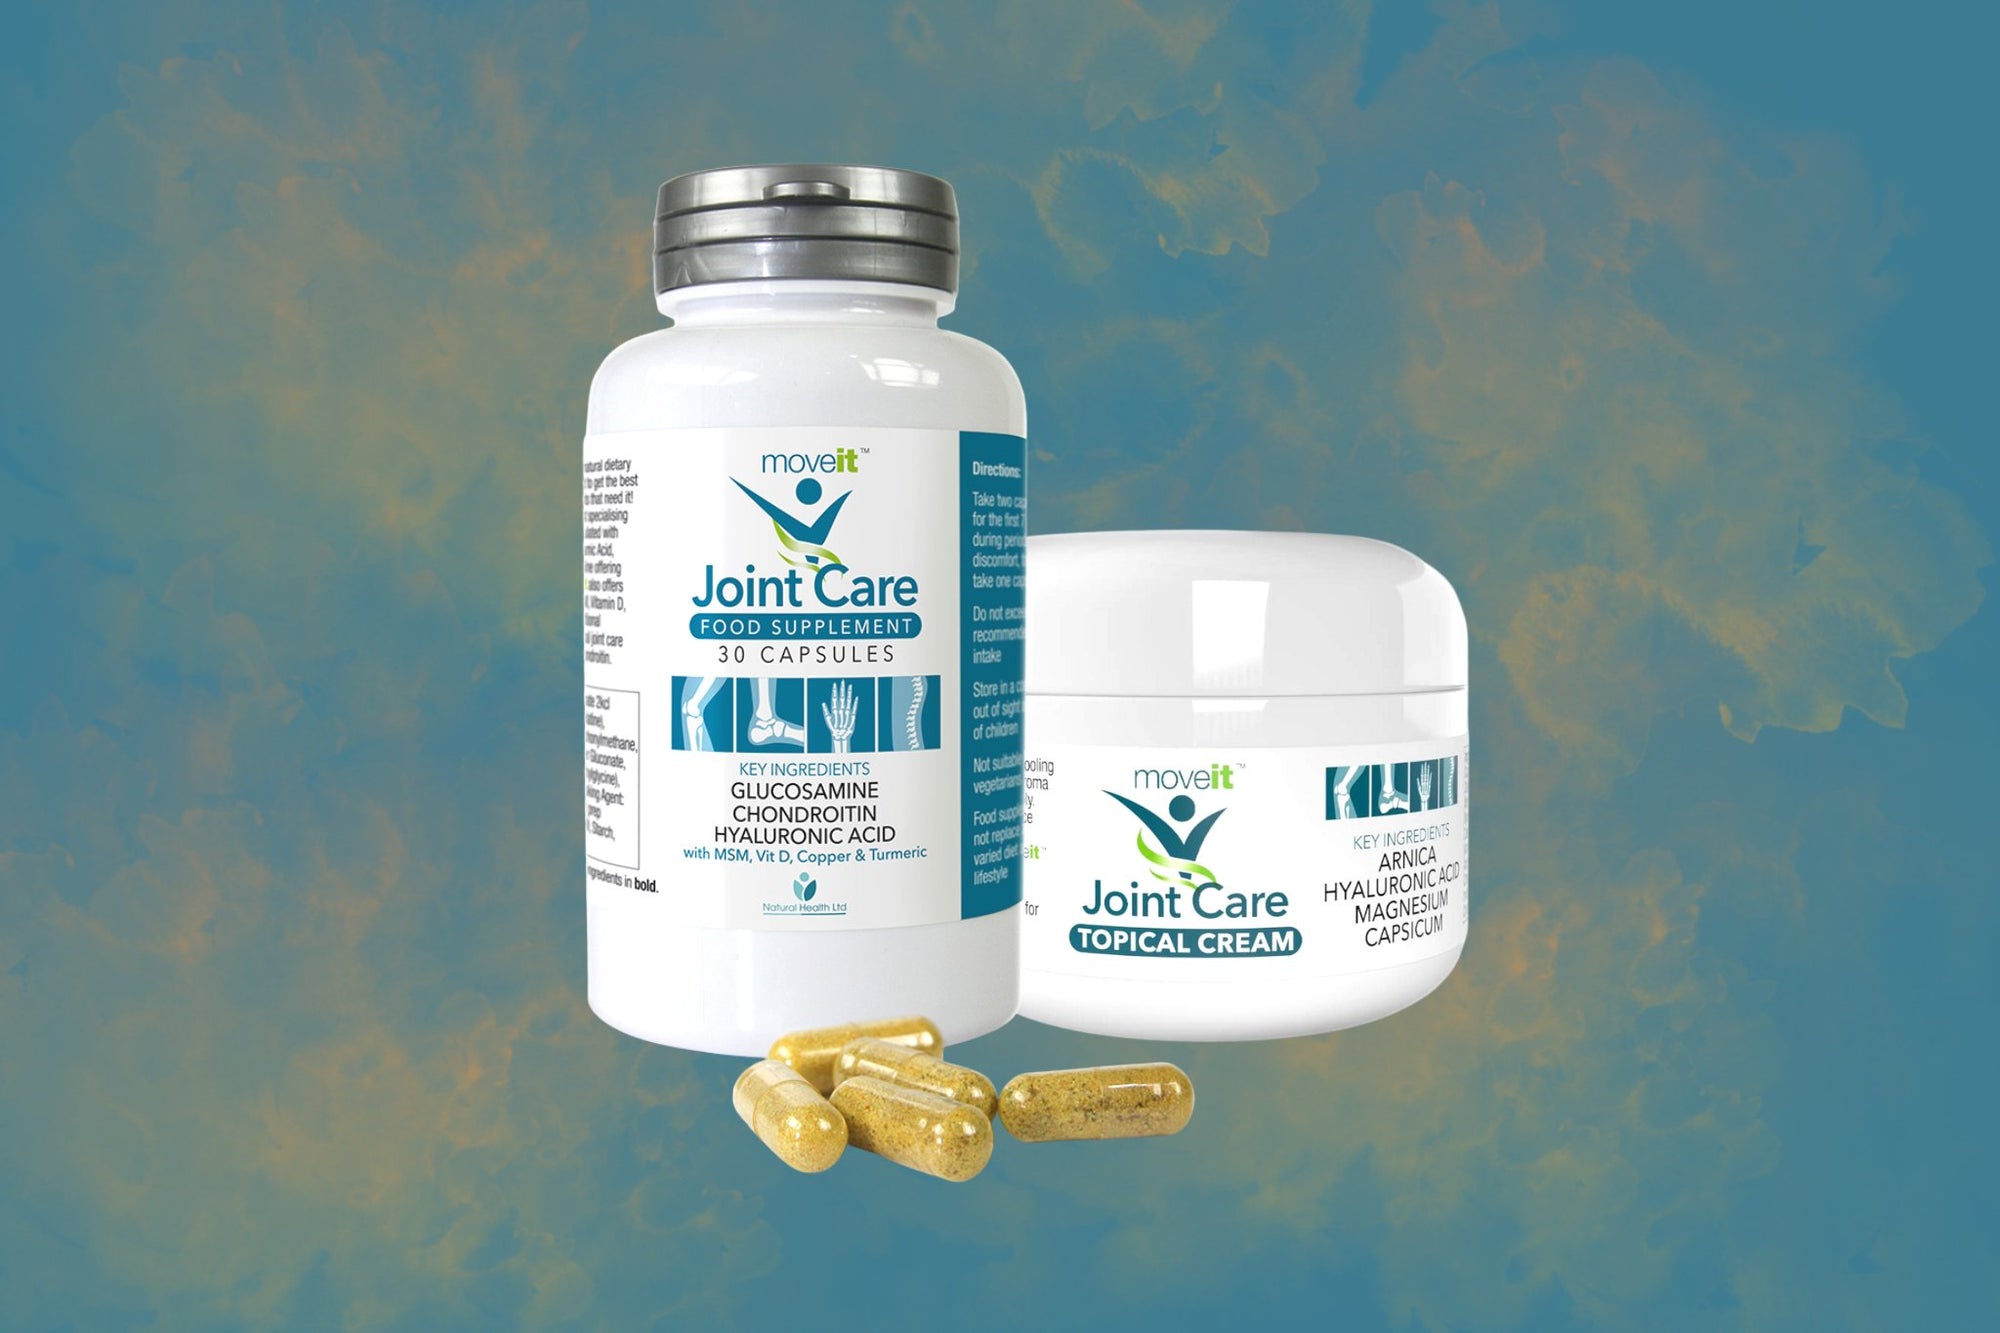 The Ultimate Solution for Joint Pain: Moveit - Manuka Honey Direct